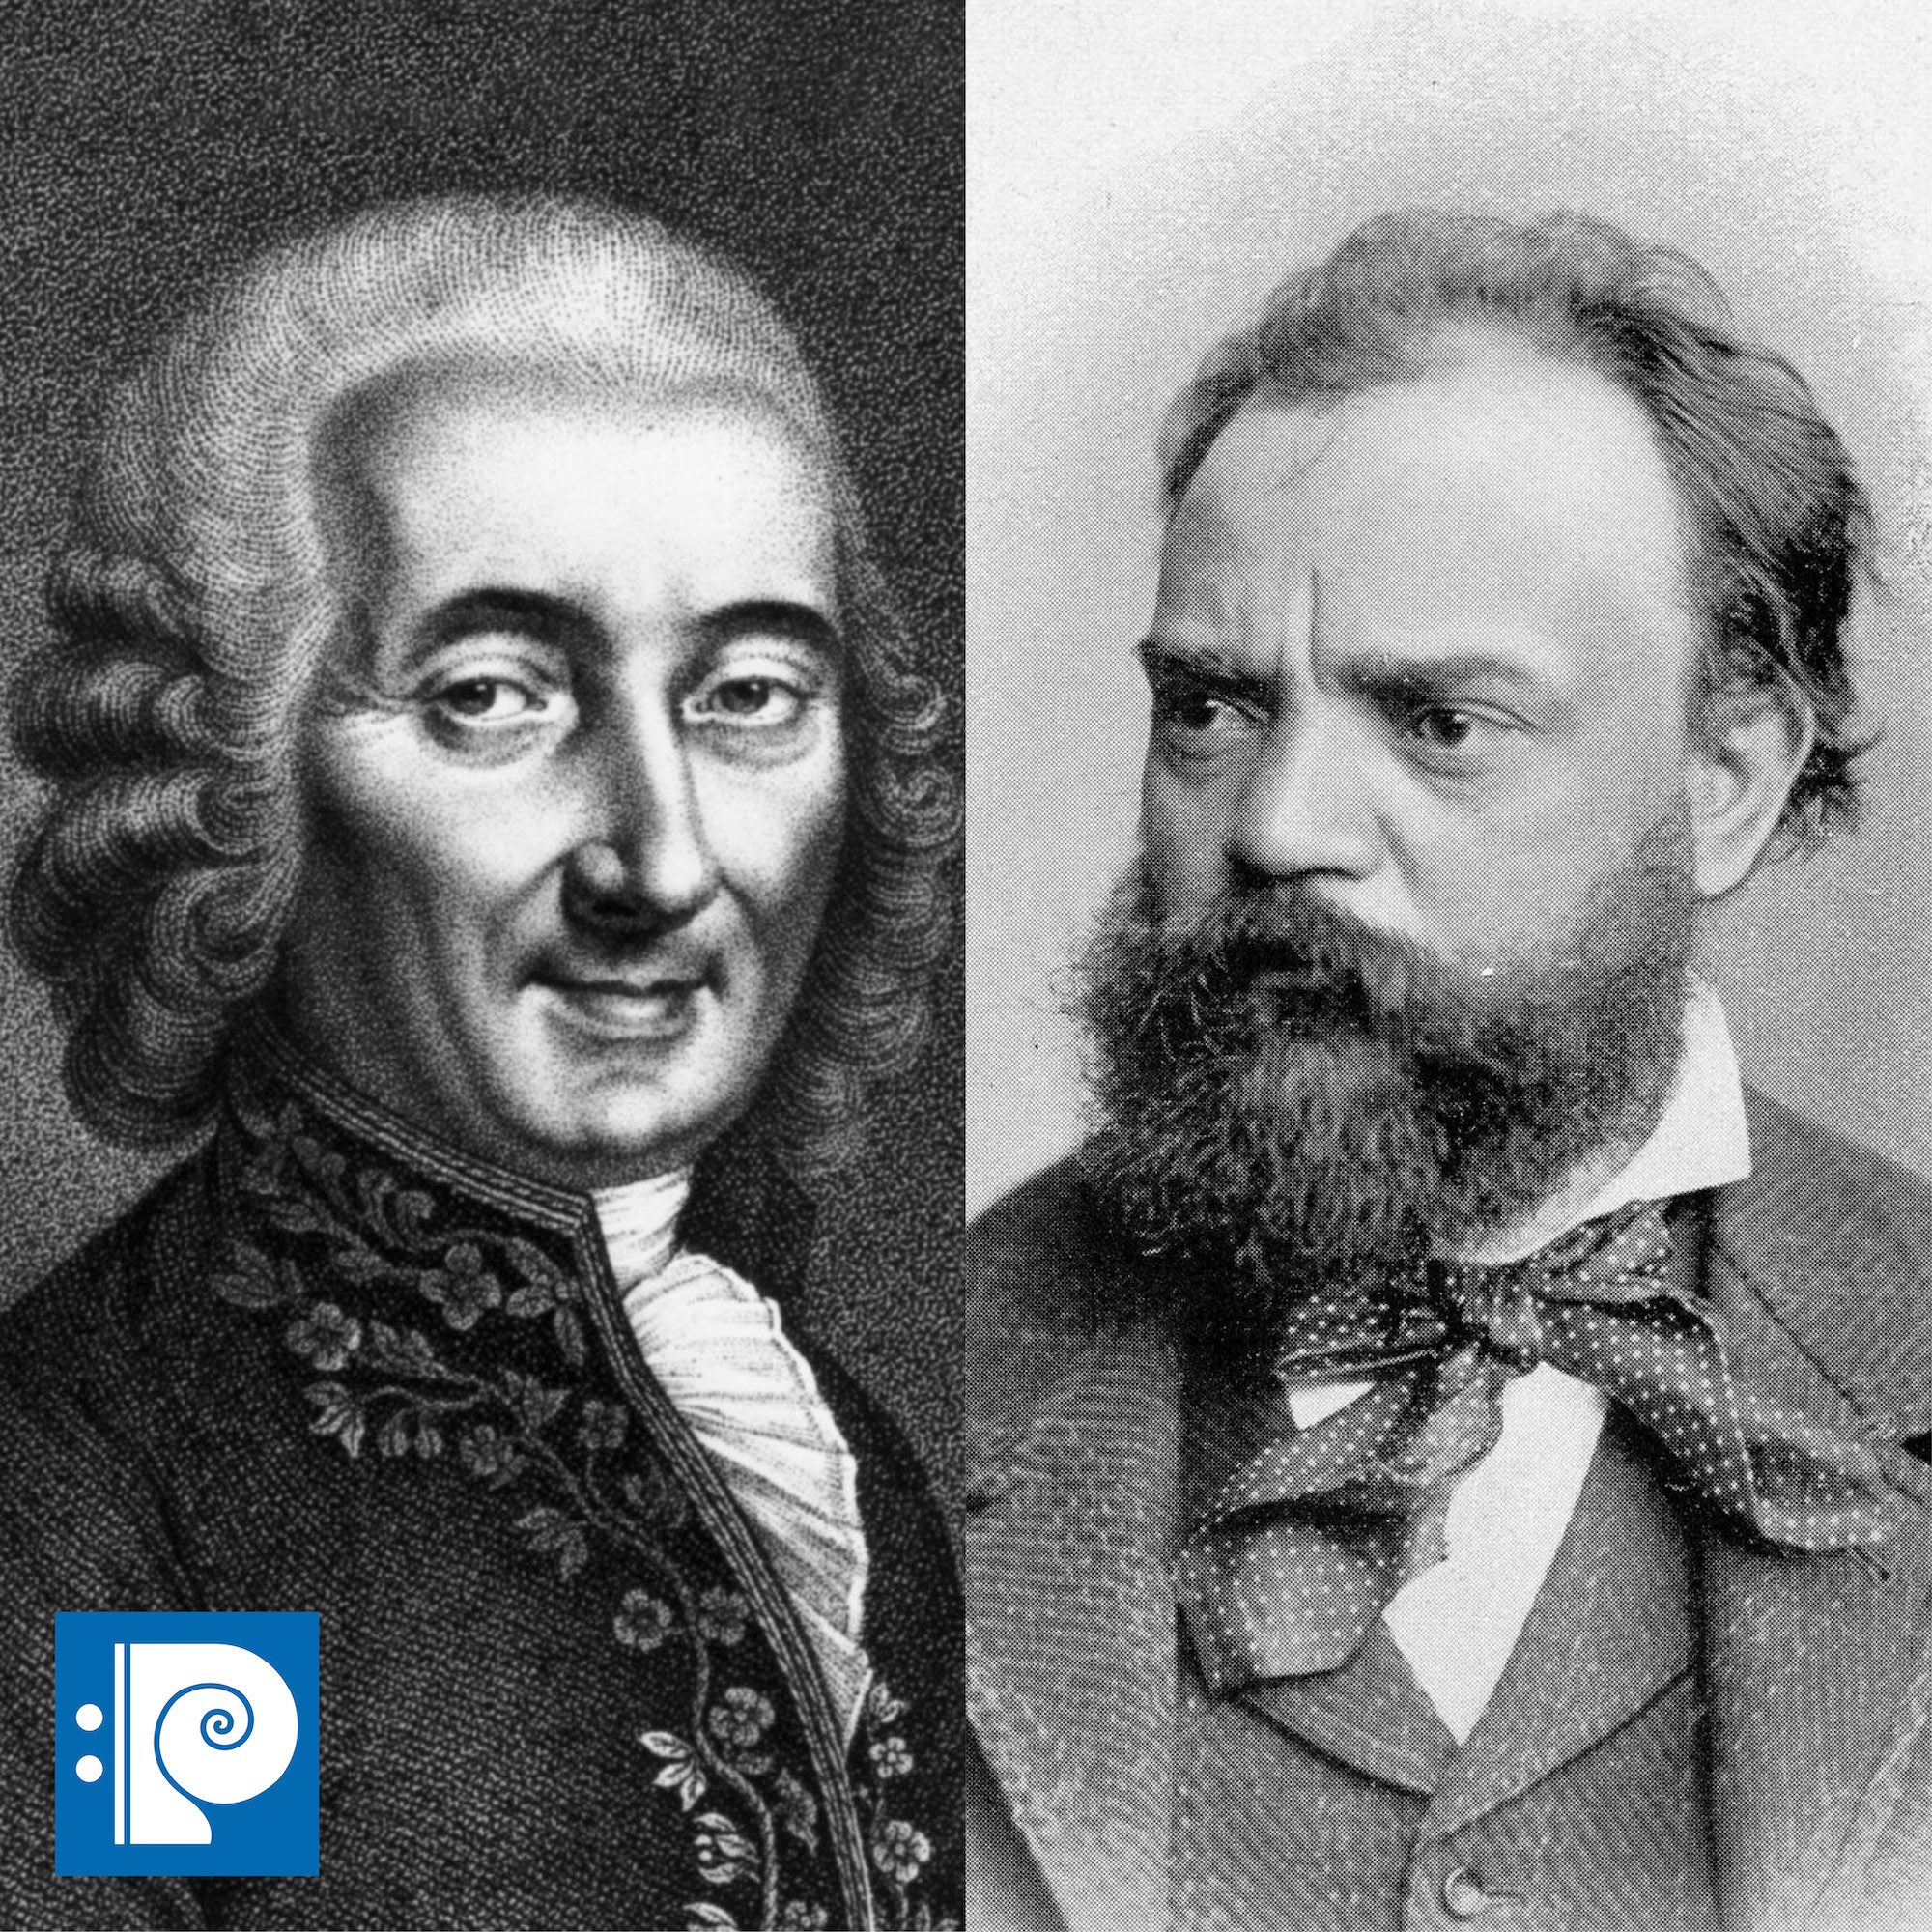 two black and white images of white male composers